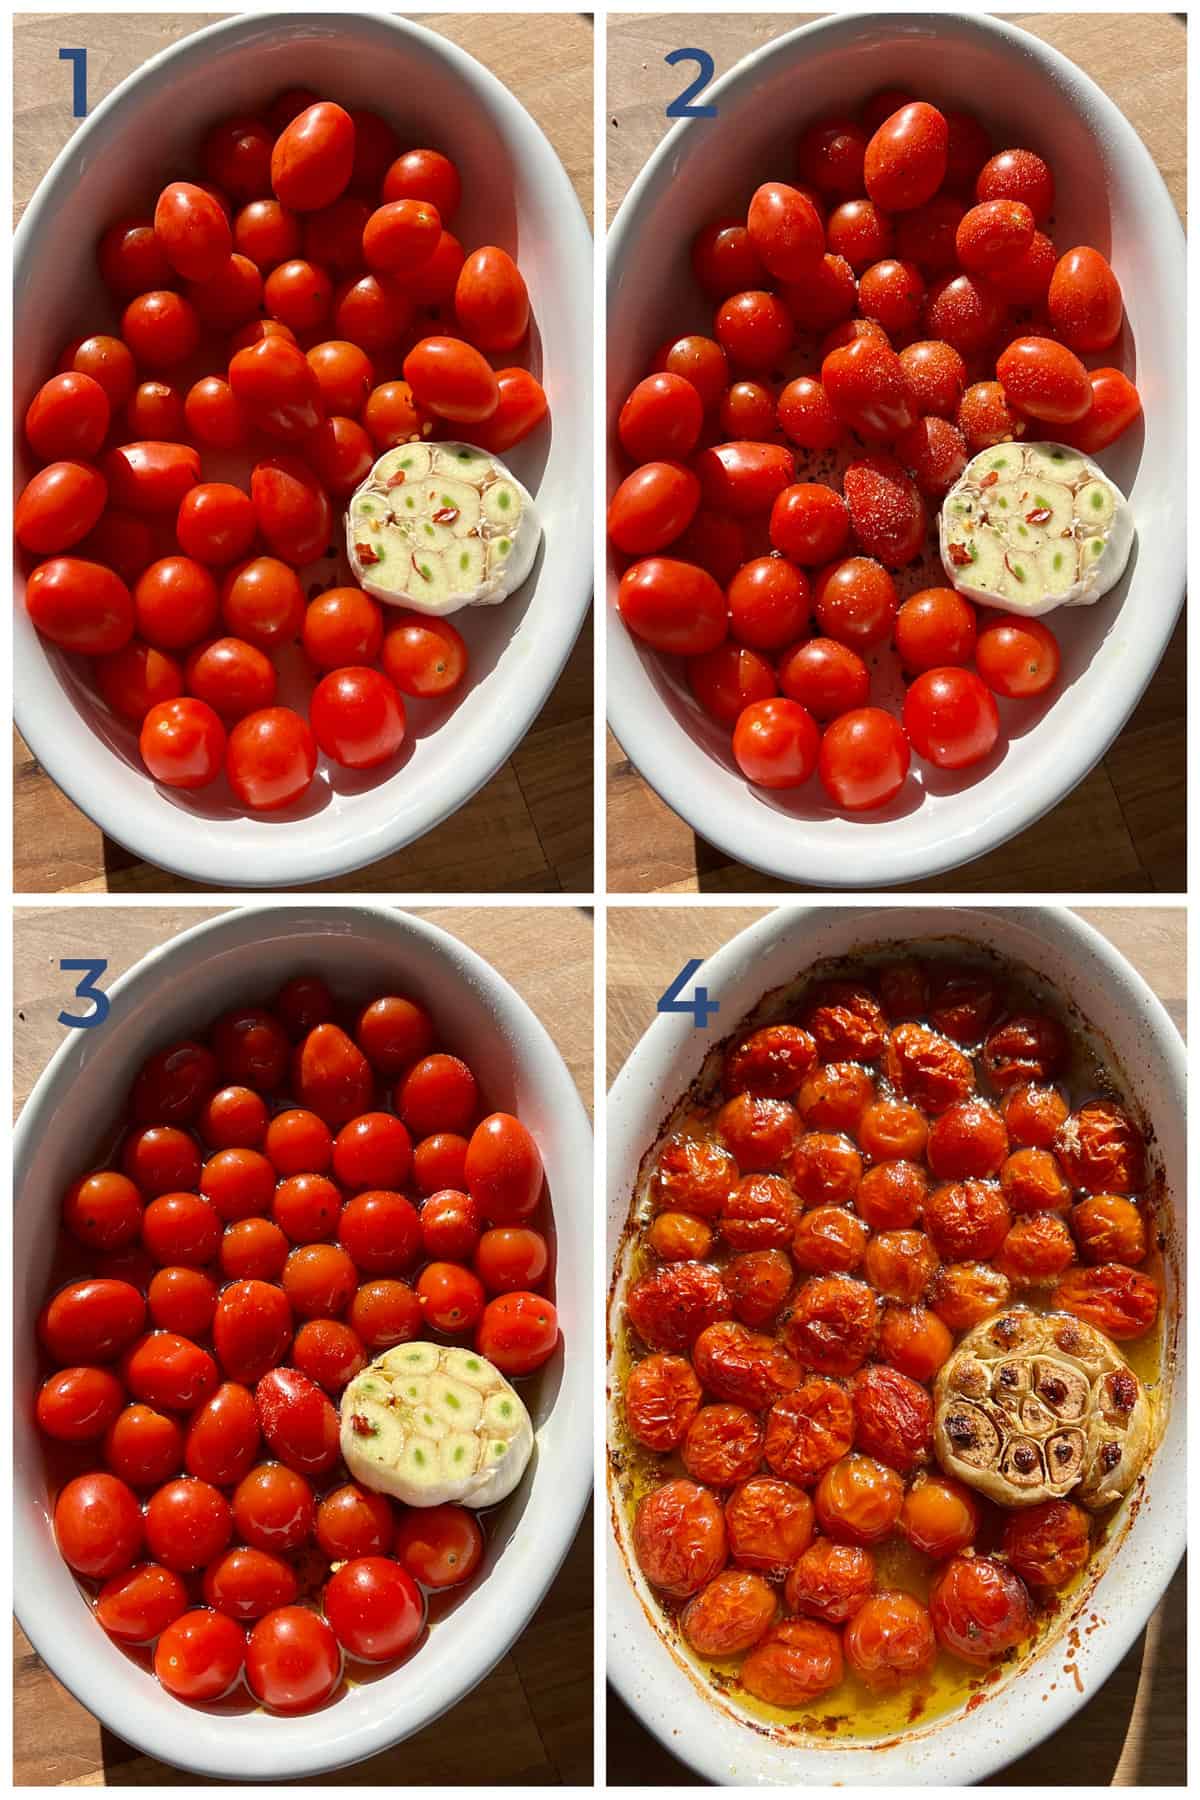 Step by Step Photos for how to make oven roasted tomatoes in olive oil, with garlic.